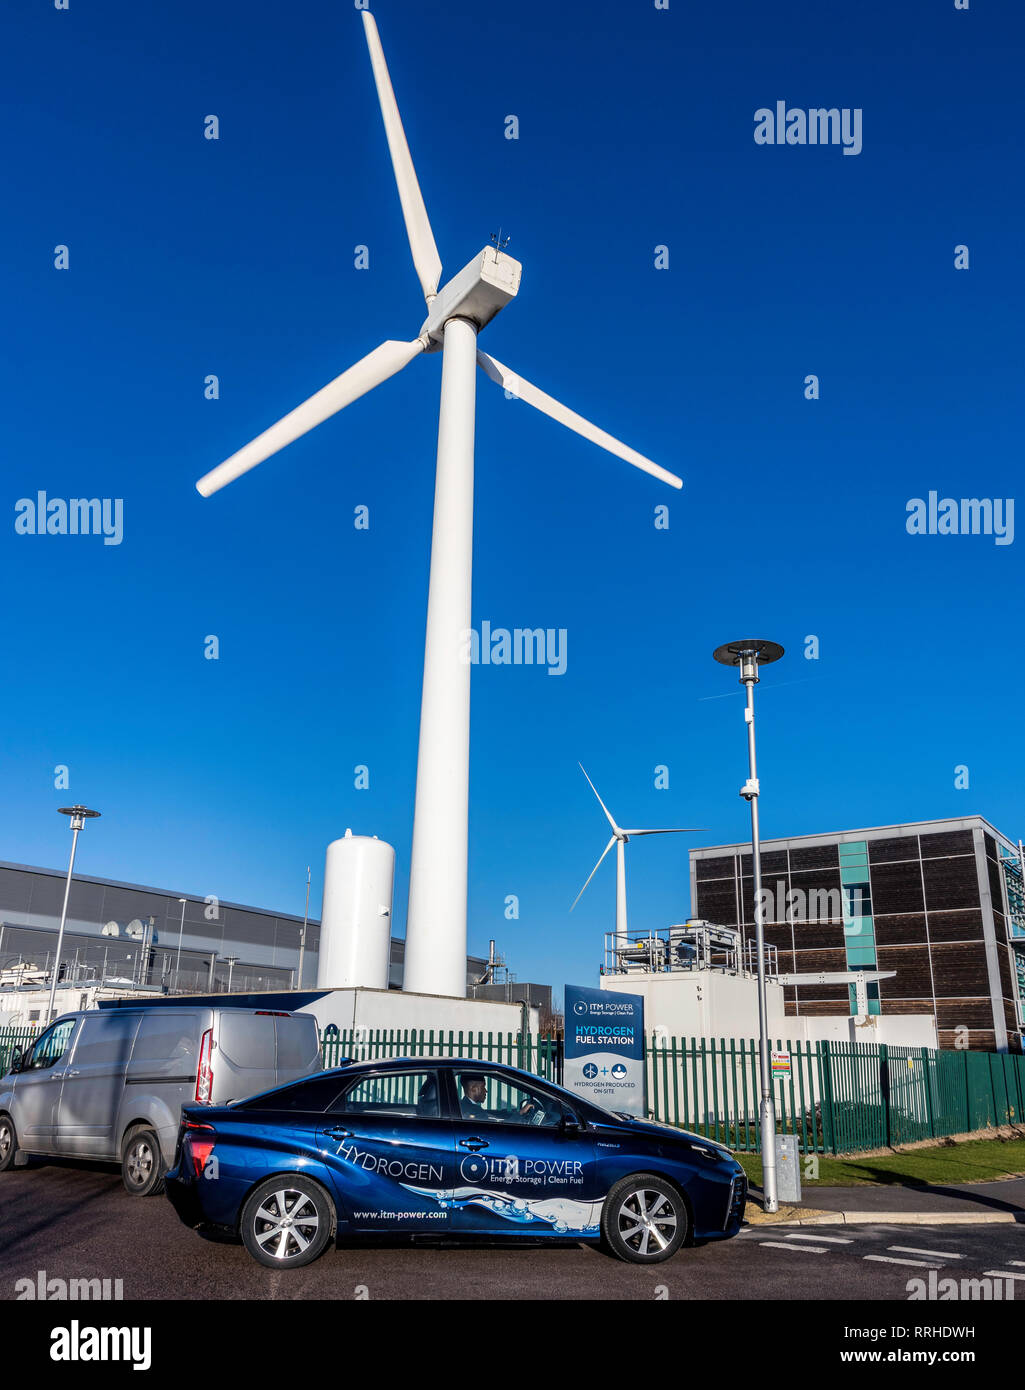 Hydrogen fuelled car outside the  ITM Power: Wind Hydrogen Station at Sheffield UK Stock Photo